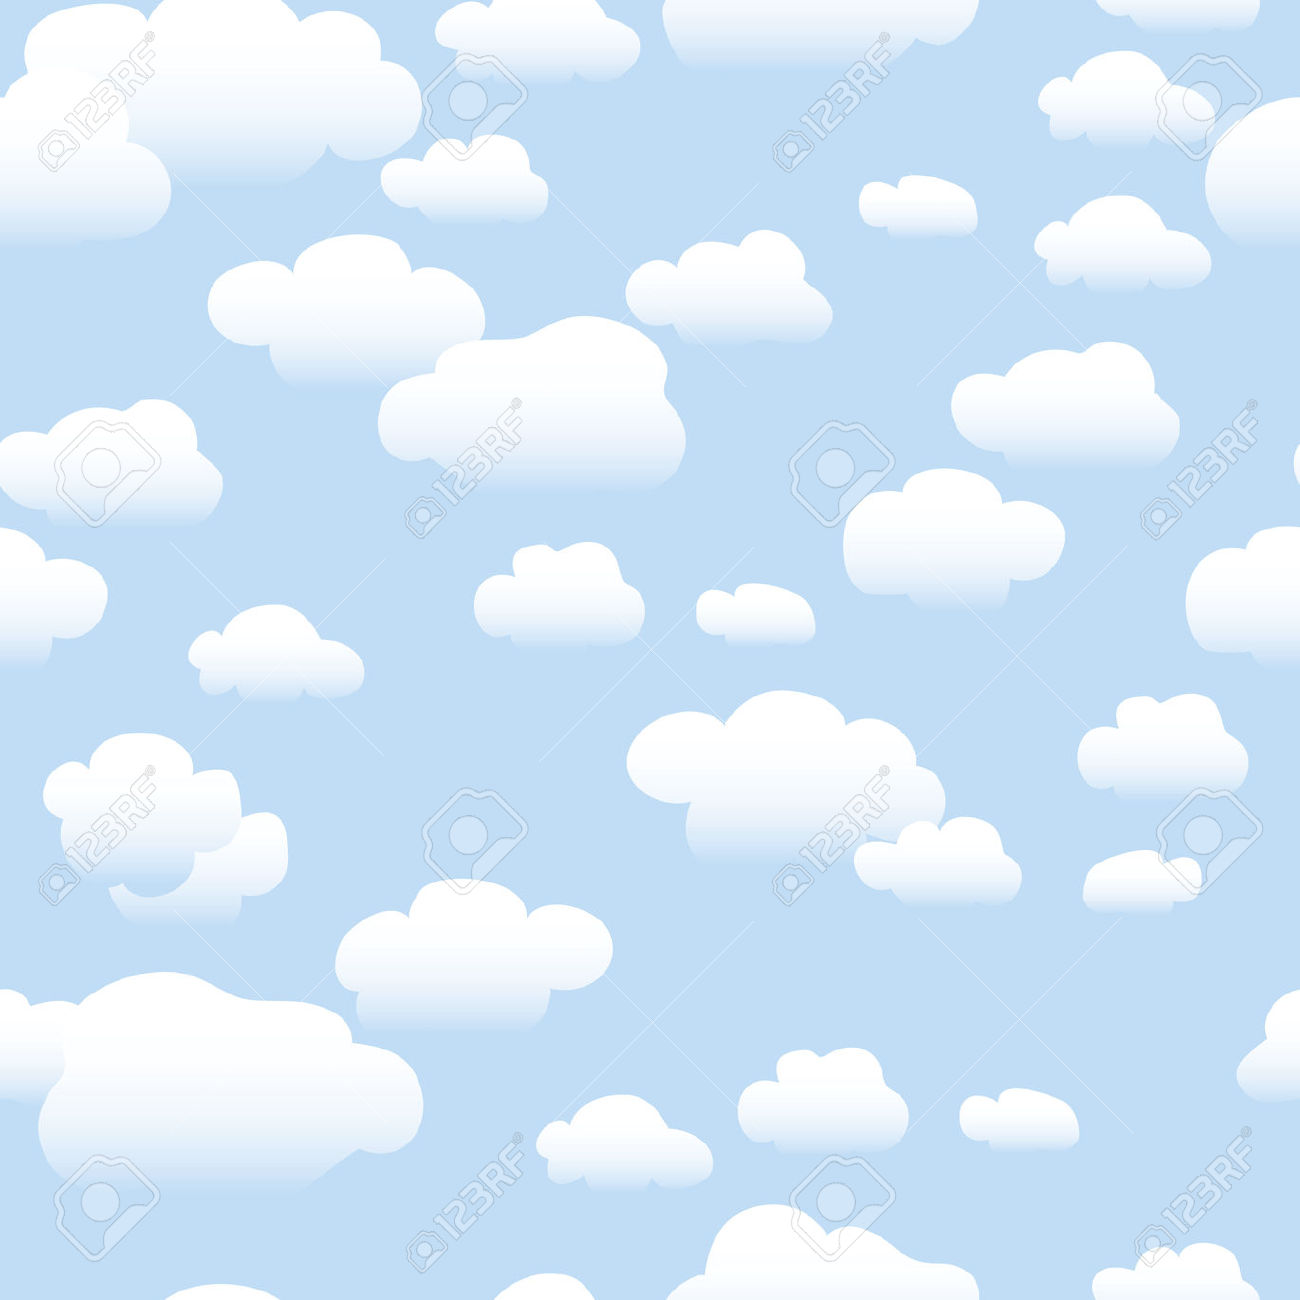 Background clouds clipart - Clipground